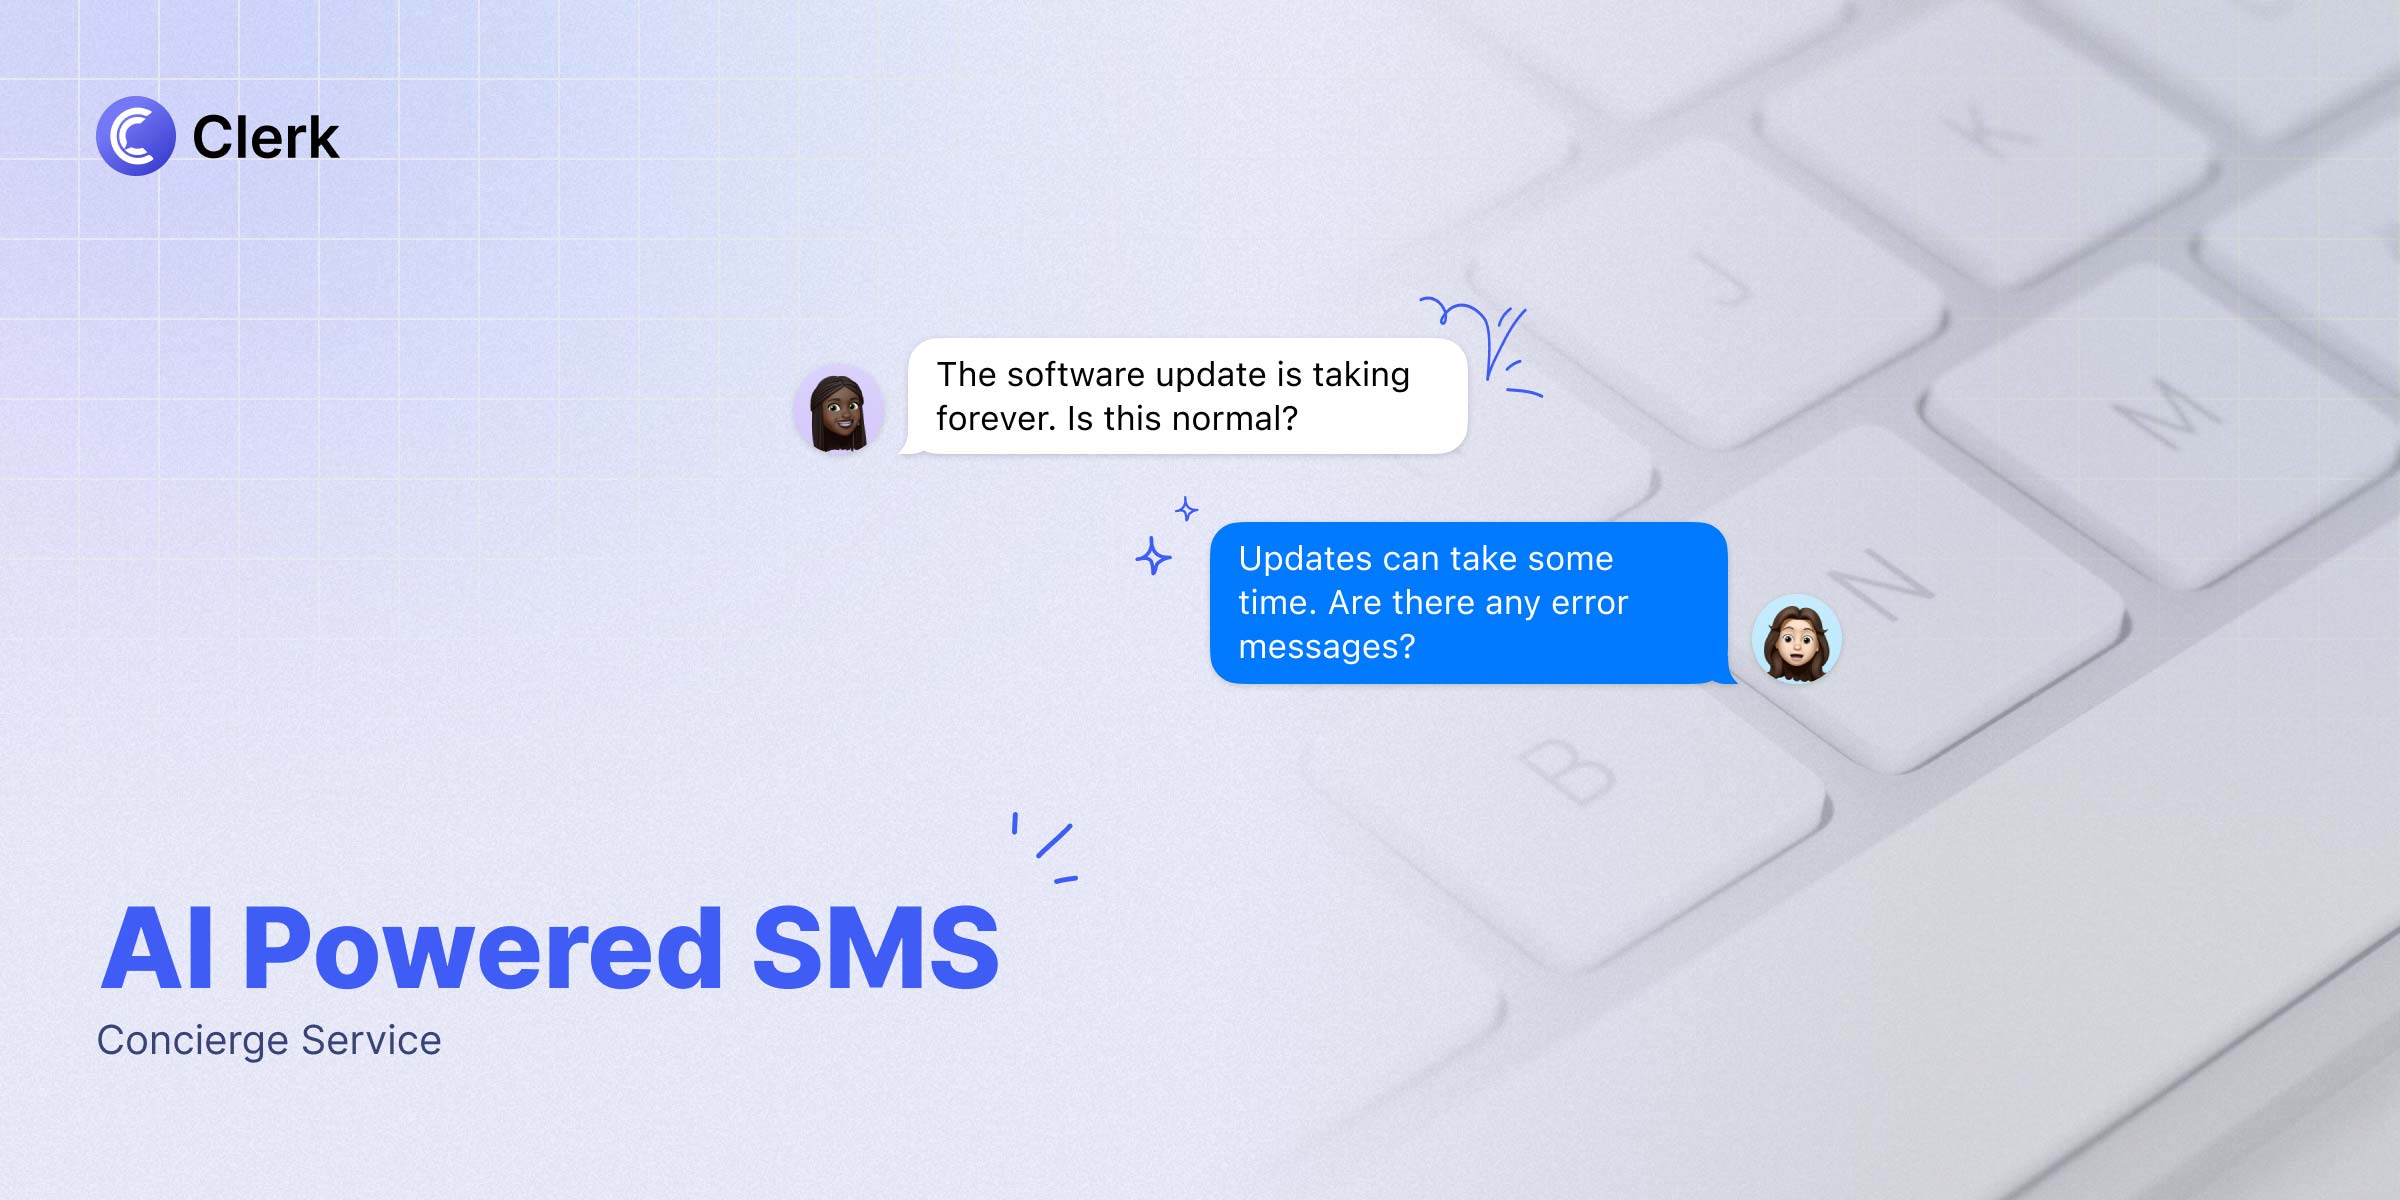 Personalized Customer Service with AI-Powered SMS